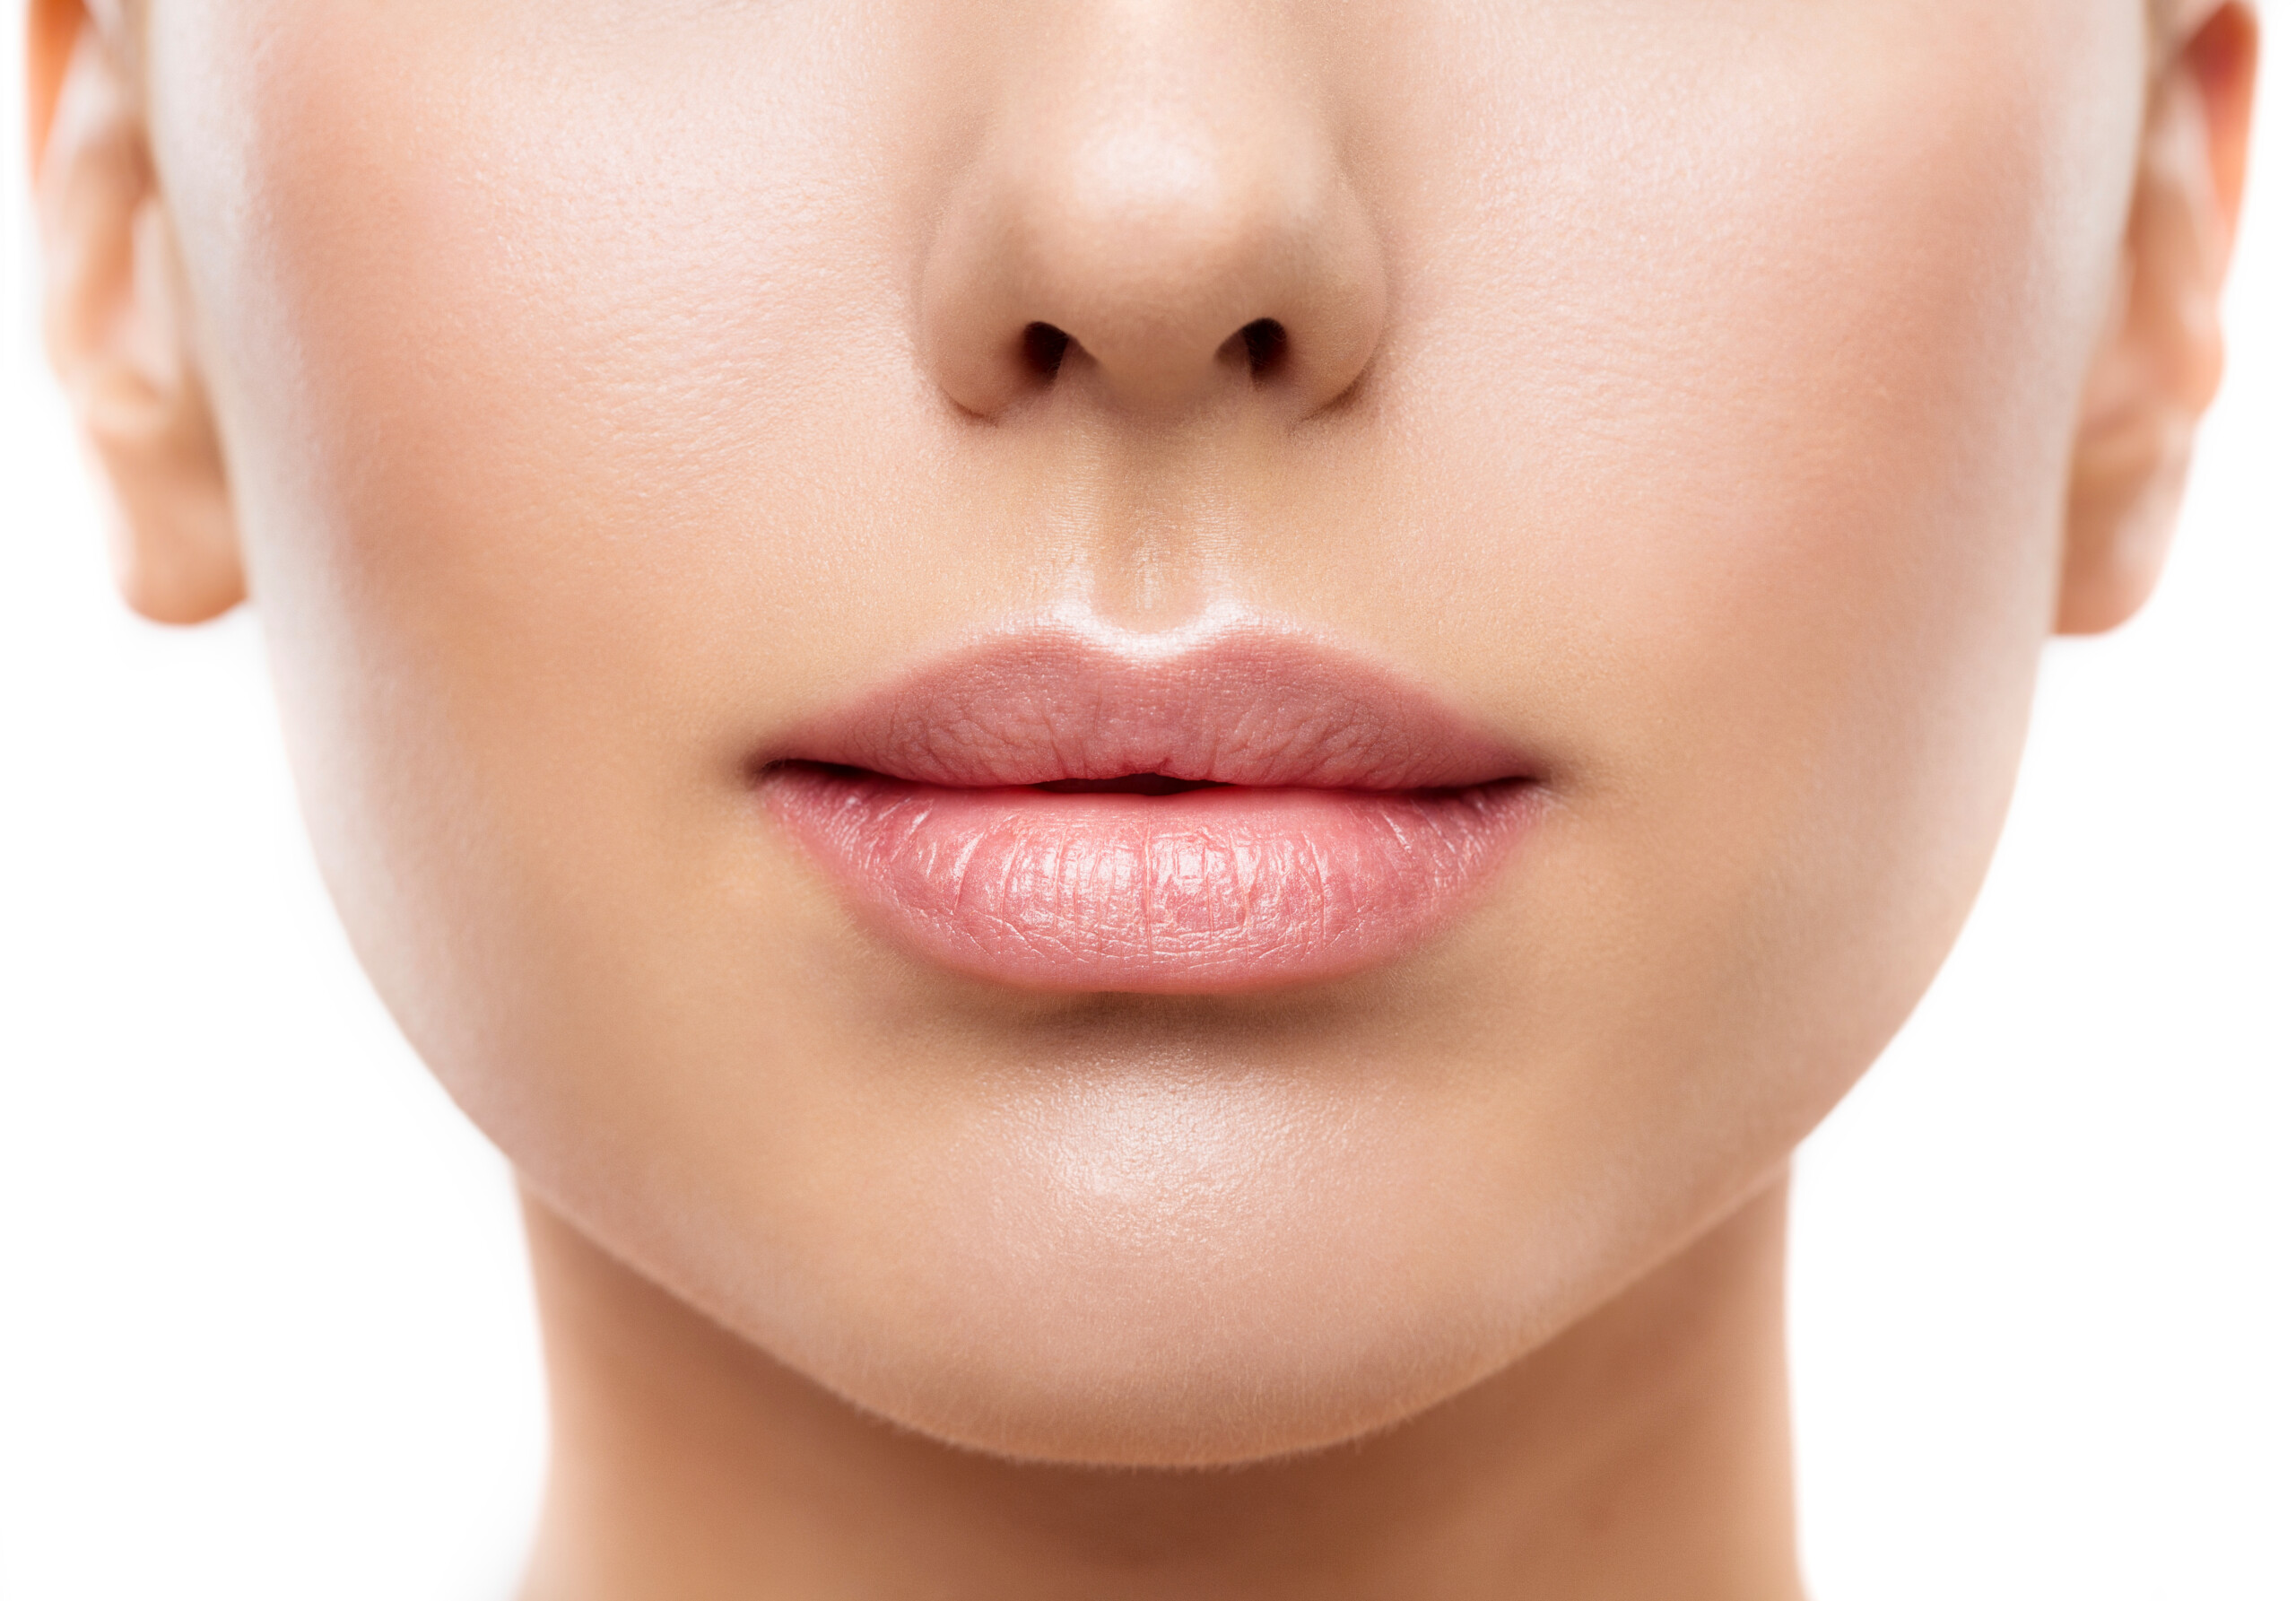 How To Make Your Cupid's Bow More Defined